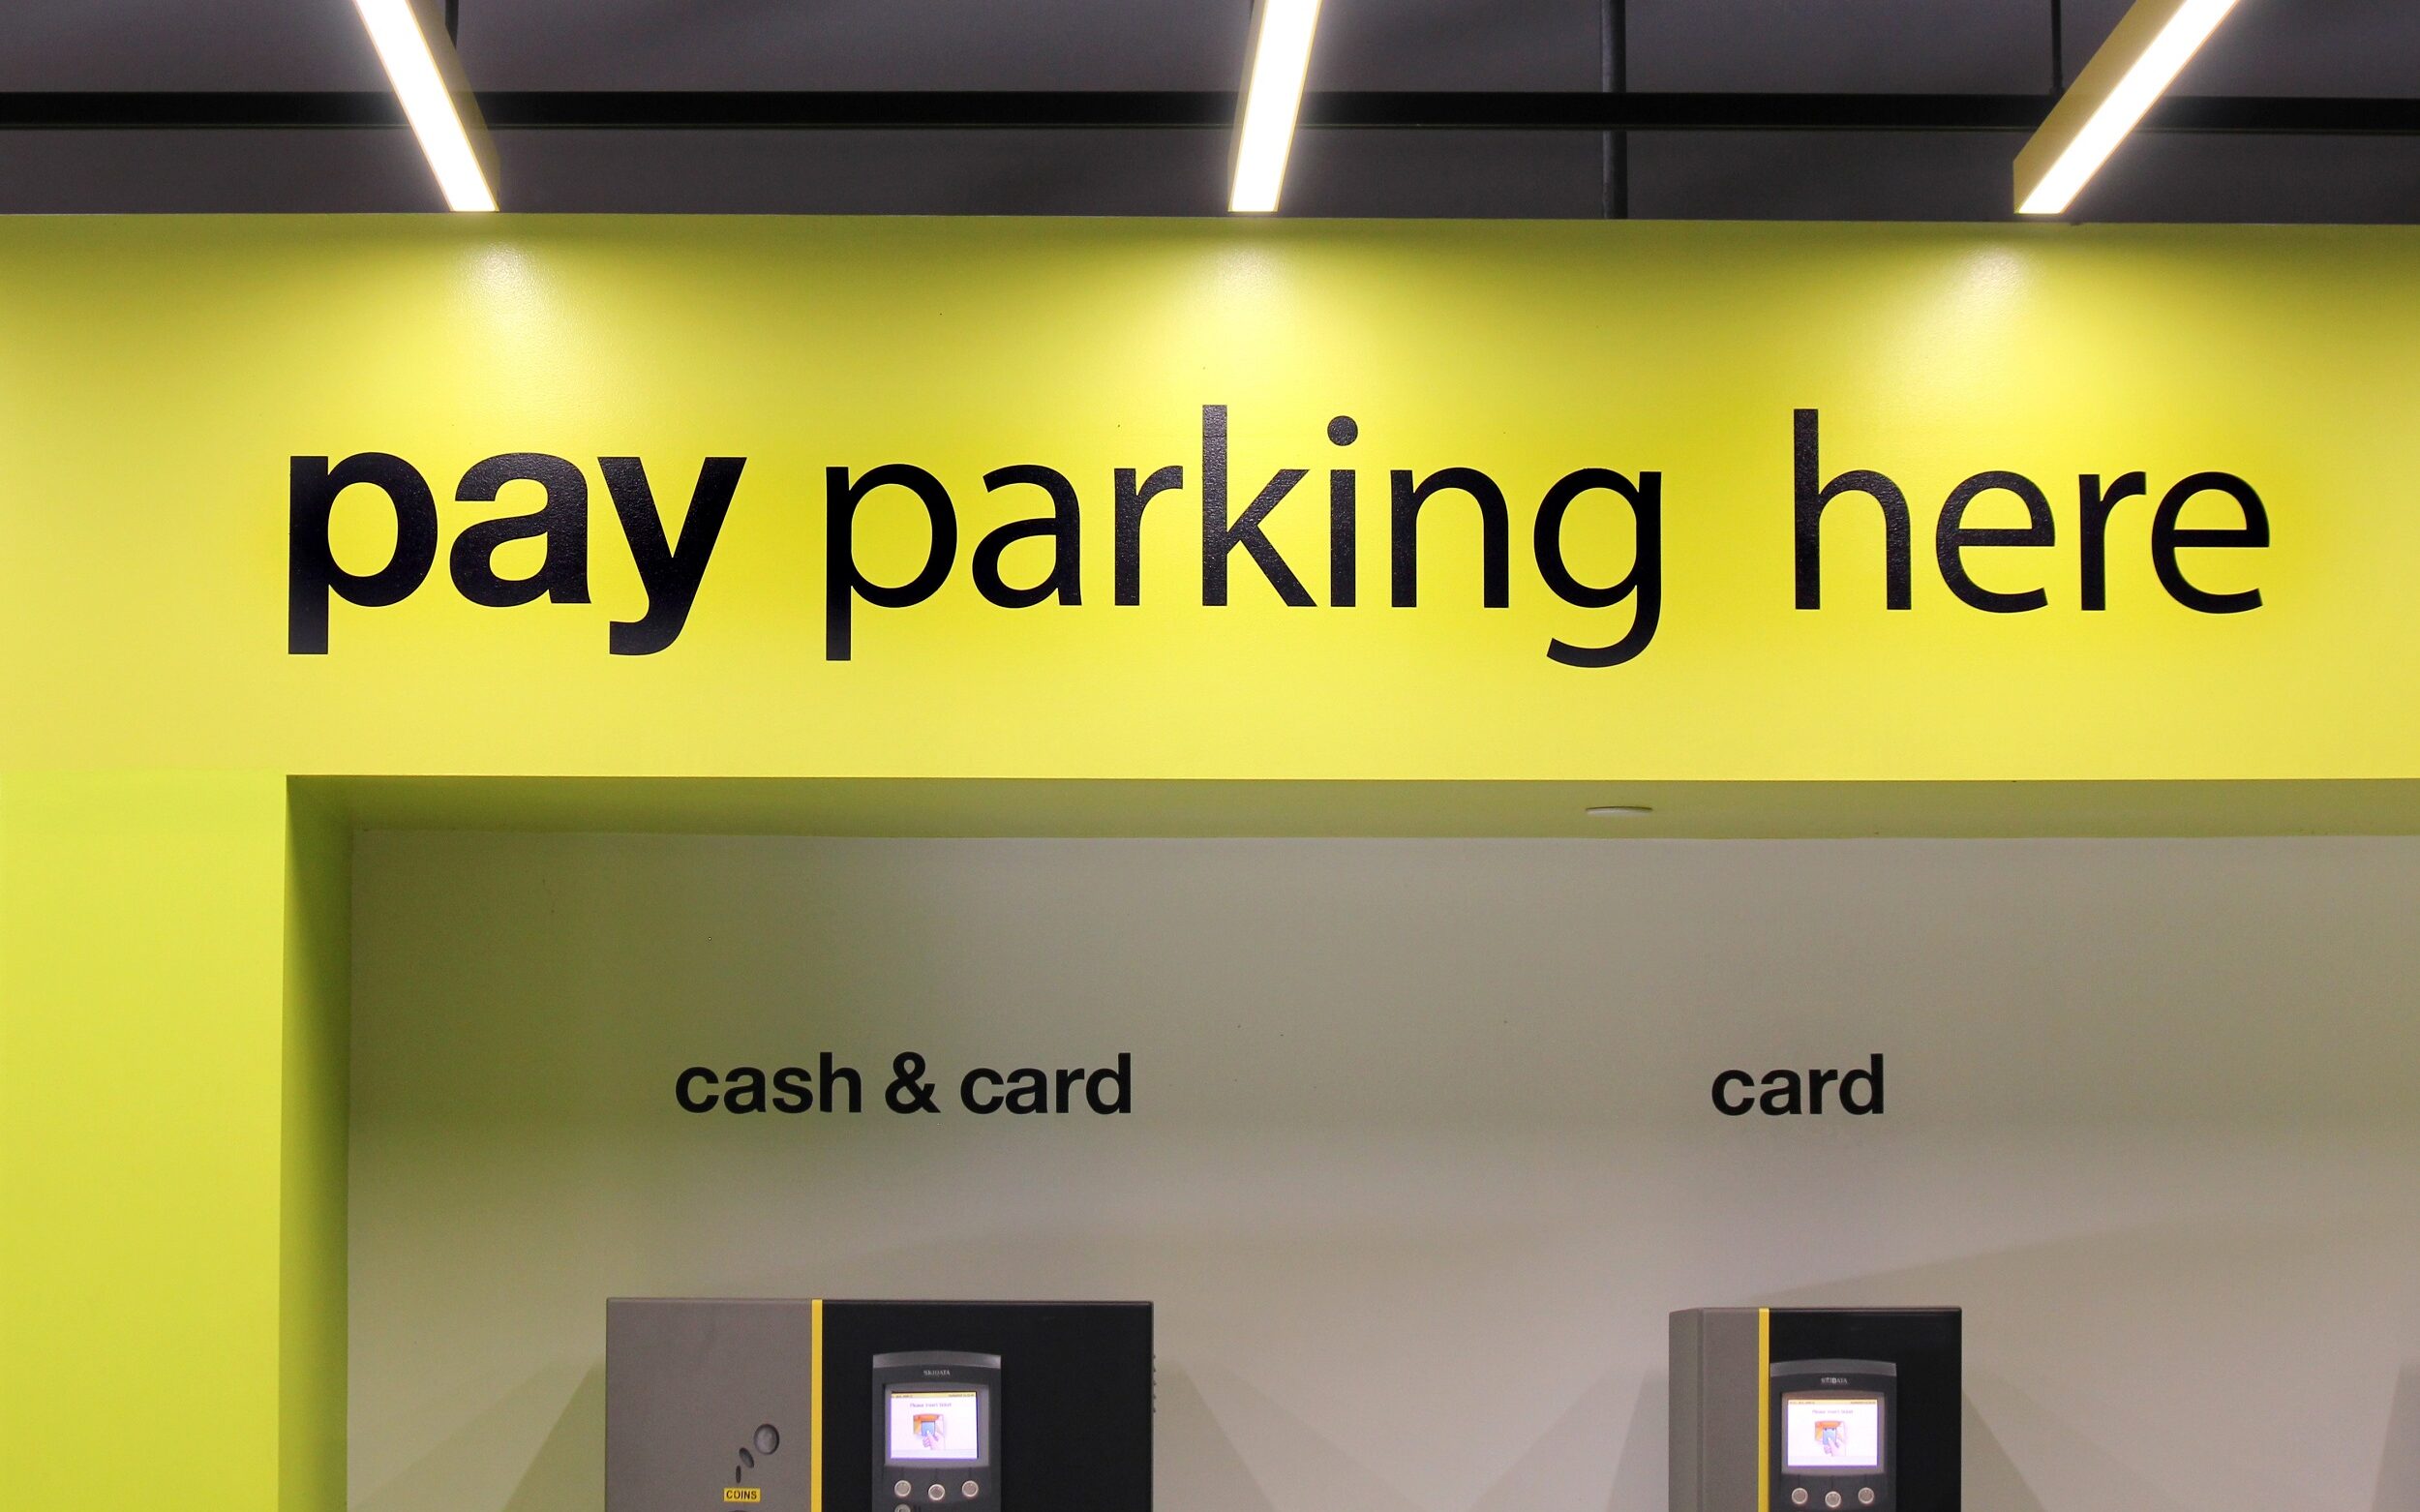 pay-parking-here-signage-in-a-public-parking-garag-JYDSFX5